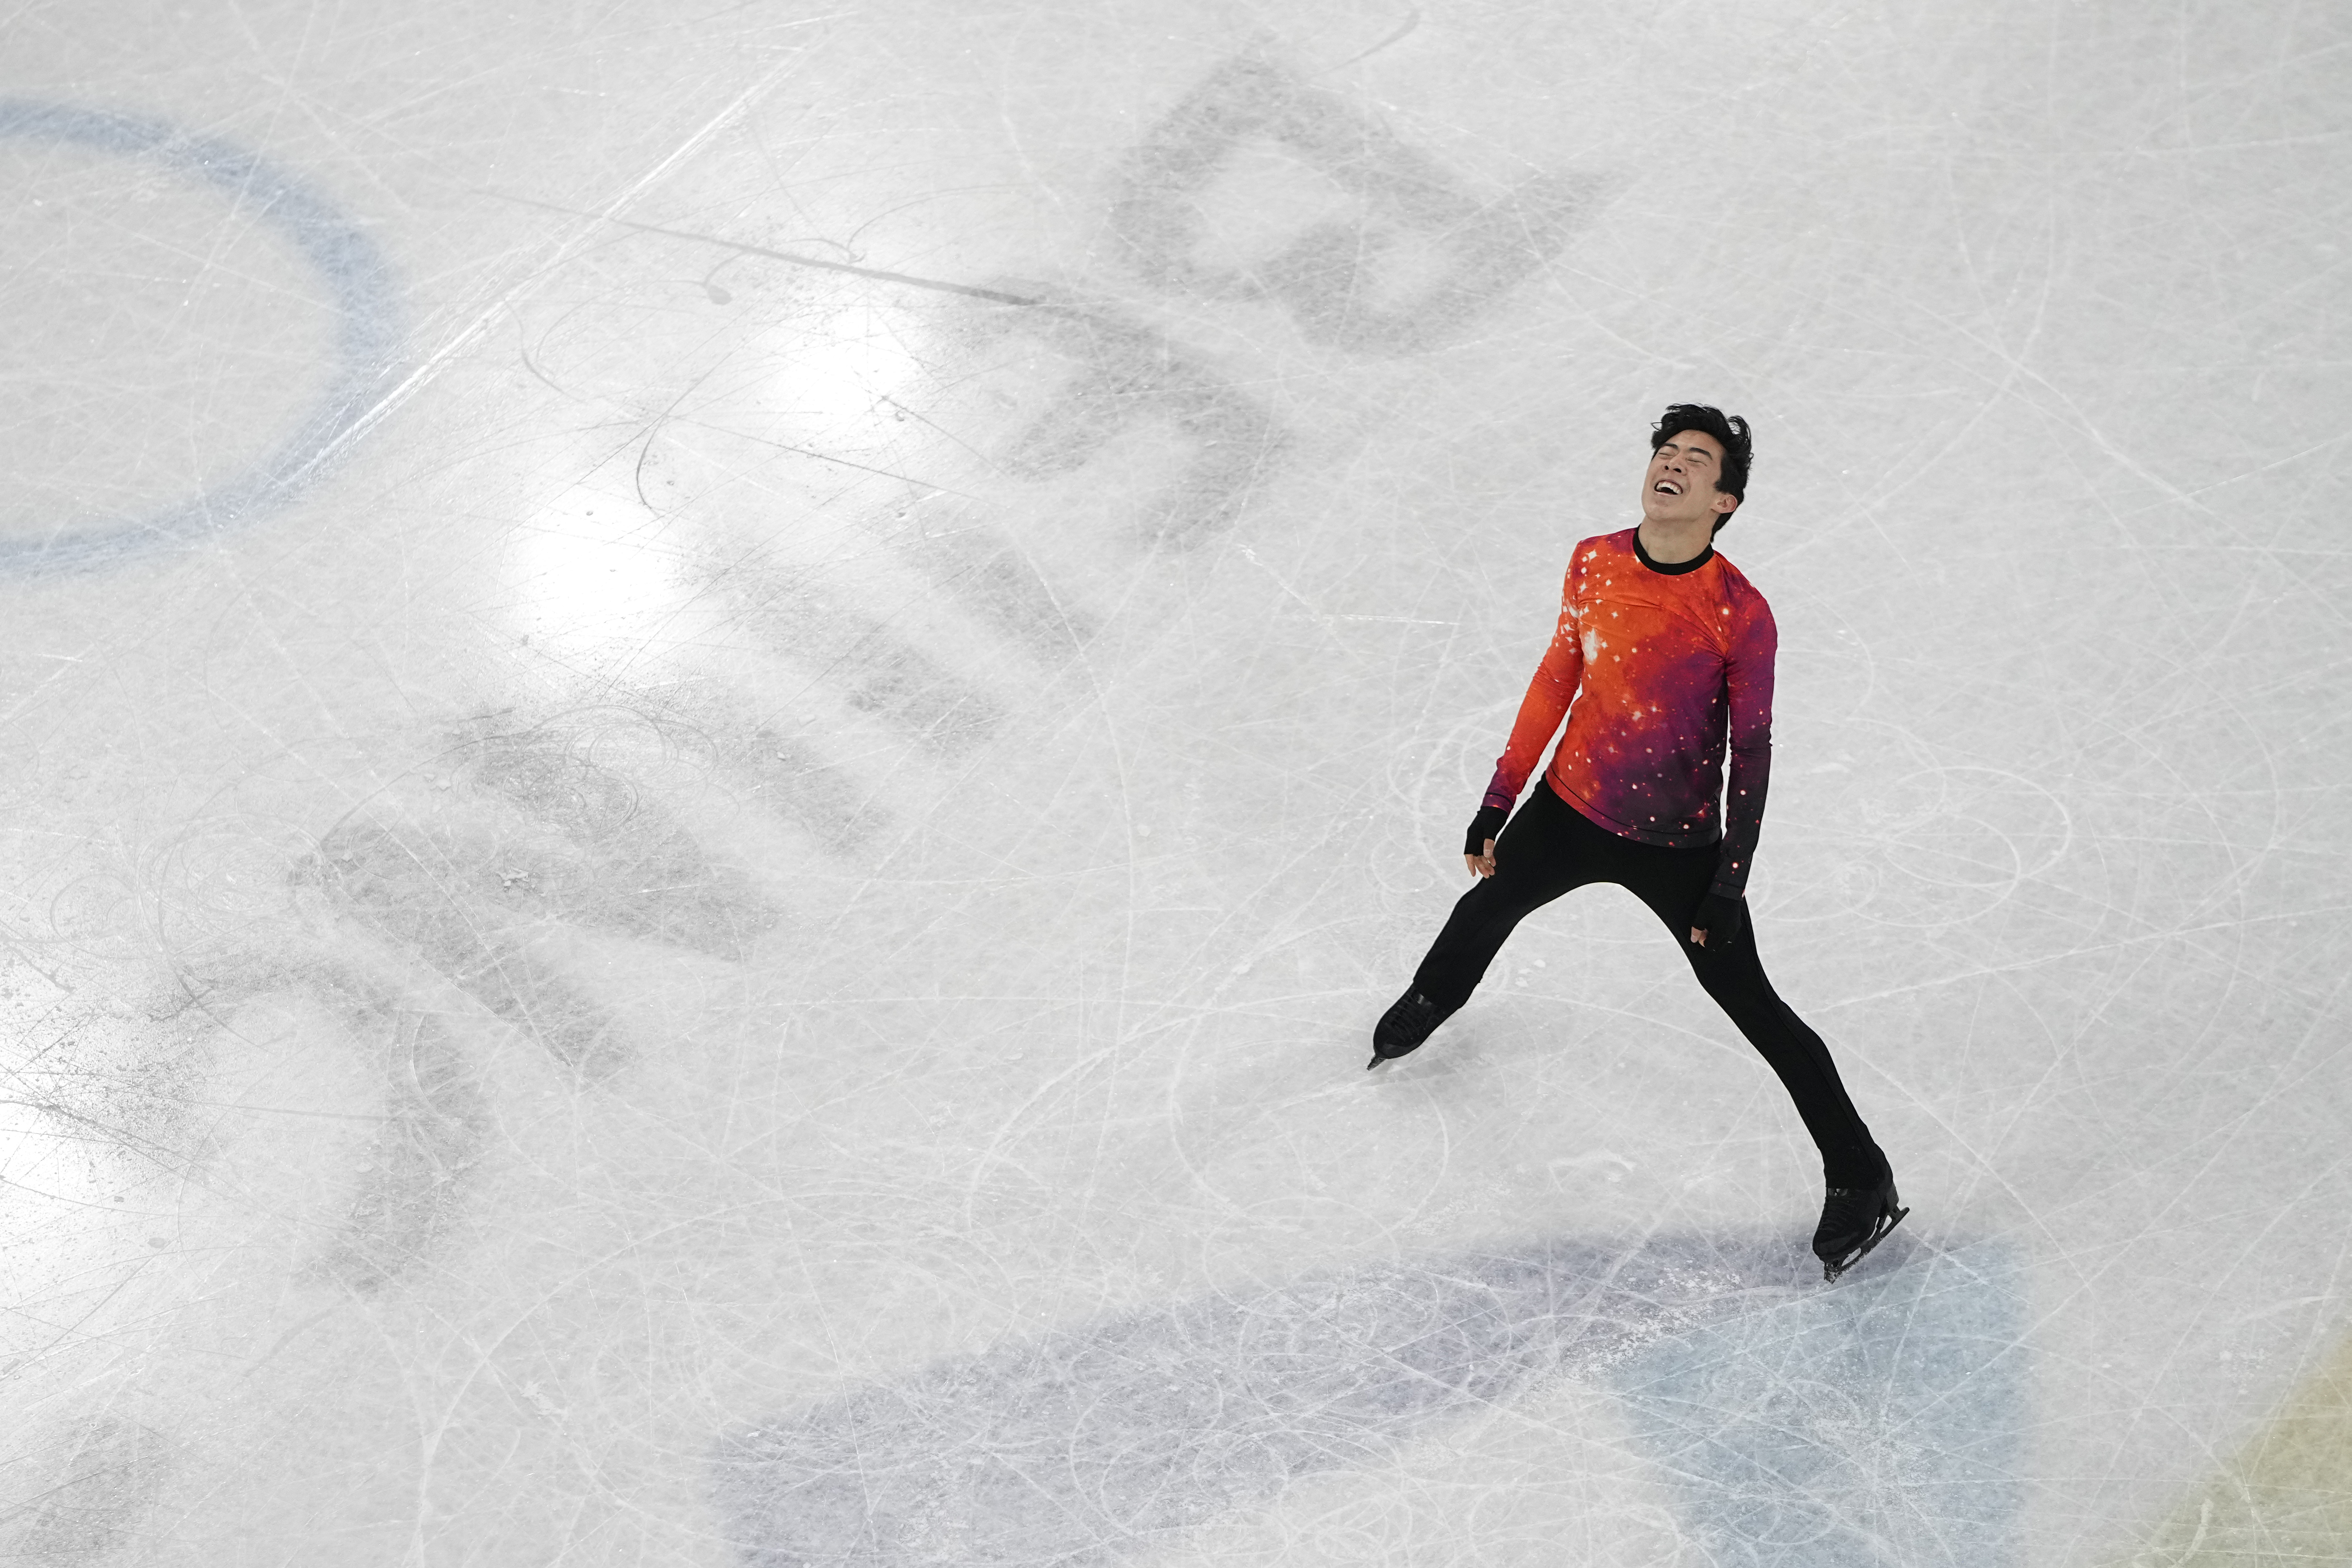 Watch Nathan Chens Gold Medal-Winning Free Skate